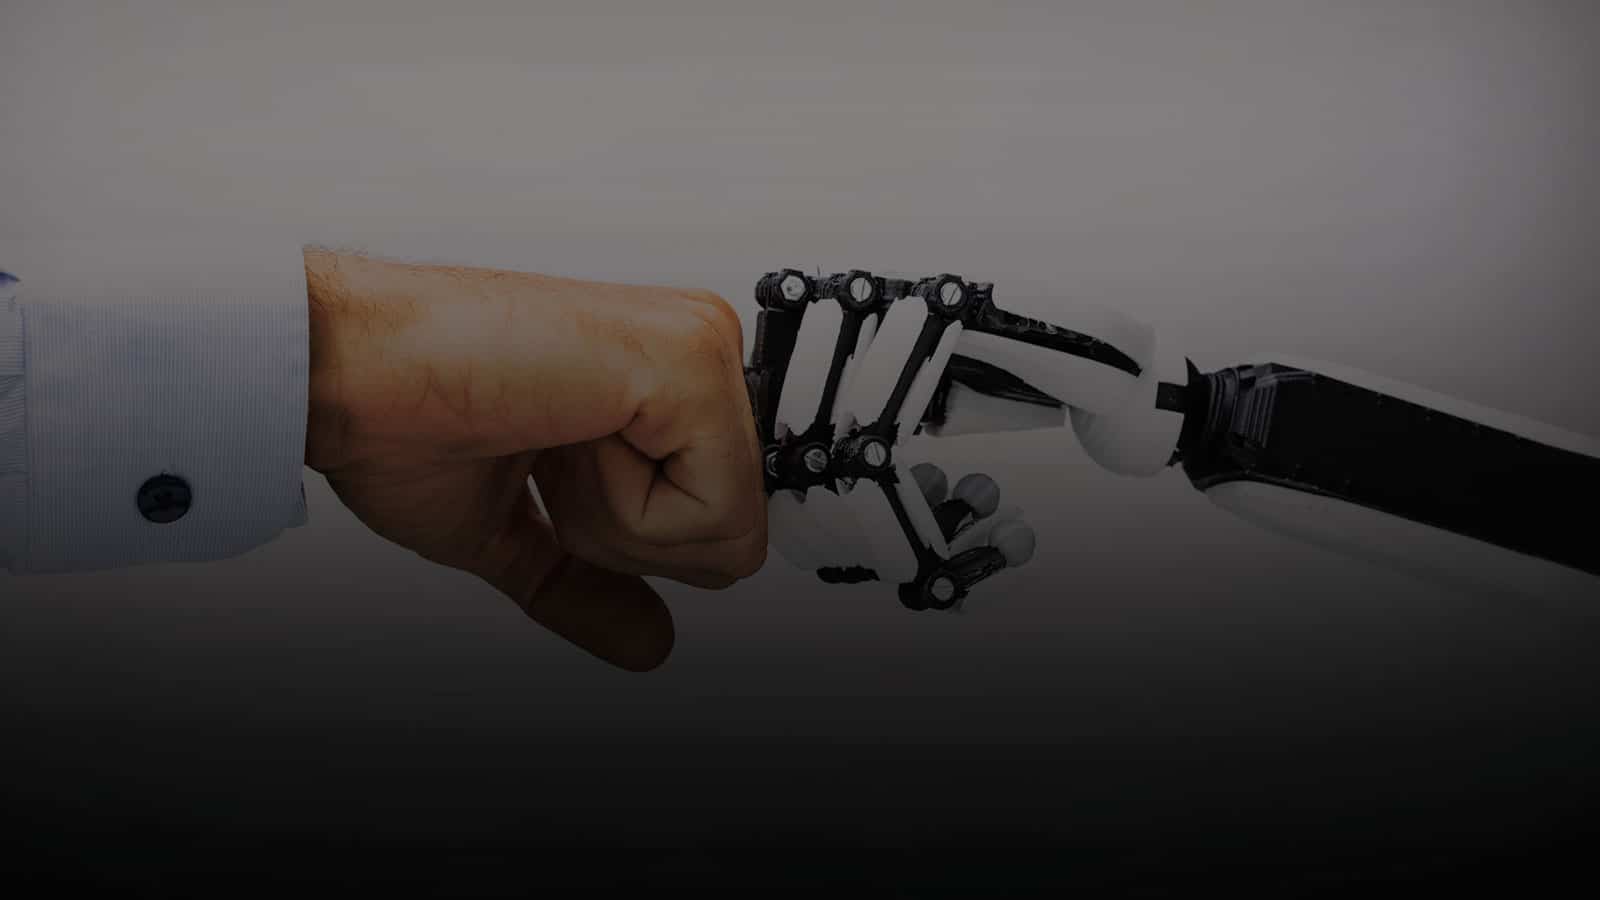 Man and Robot fist bumping